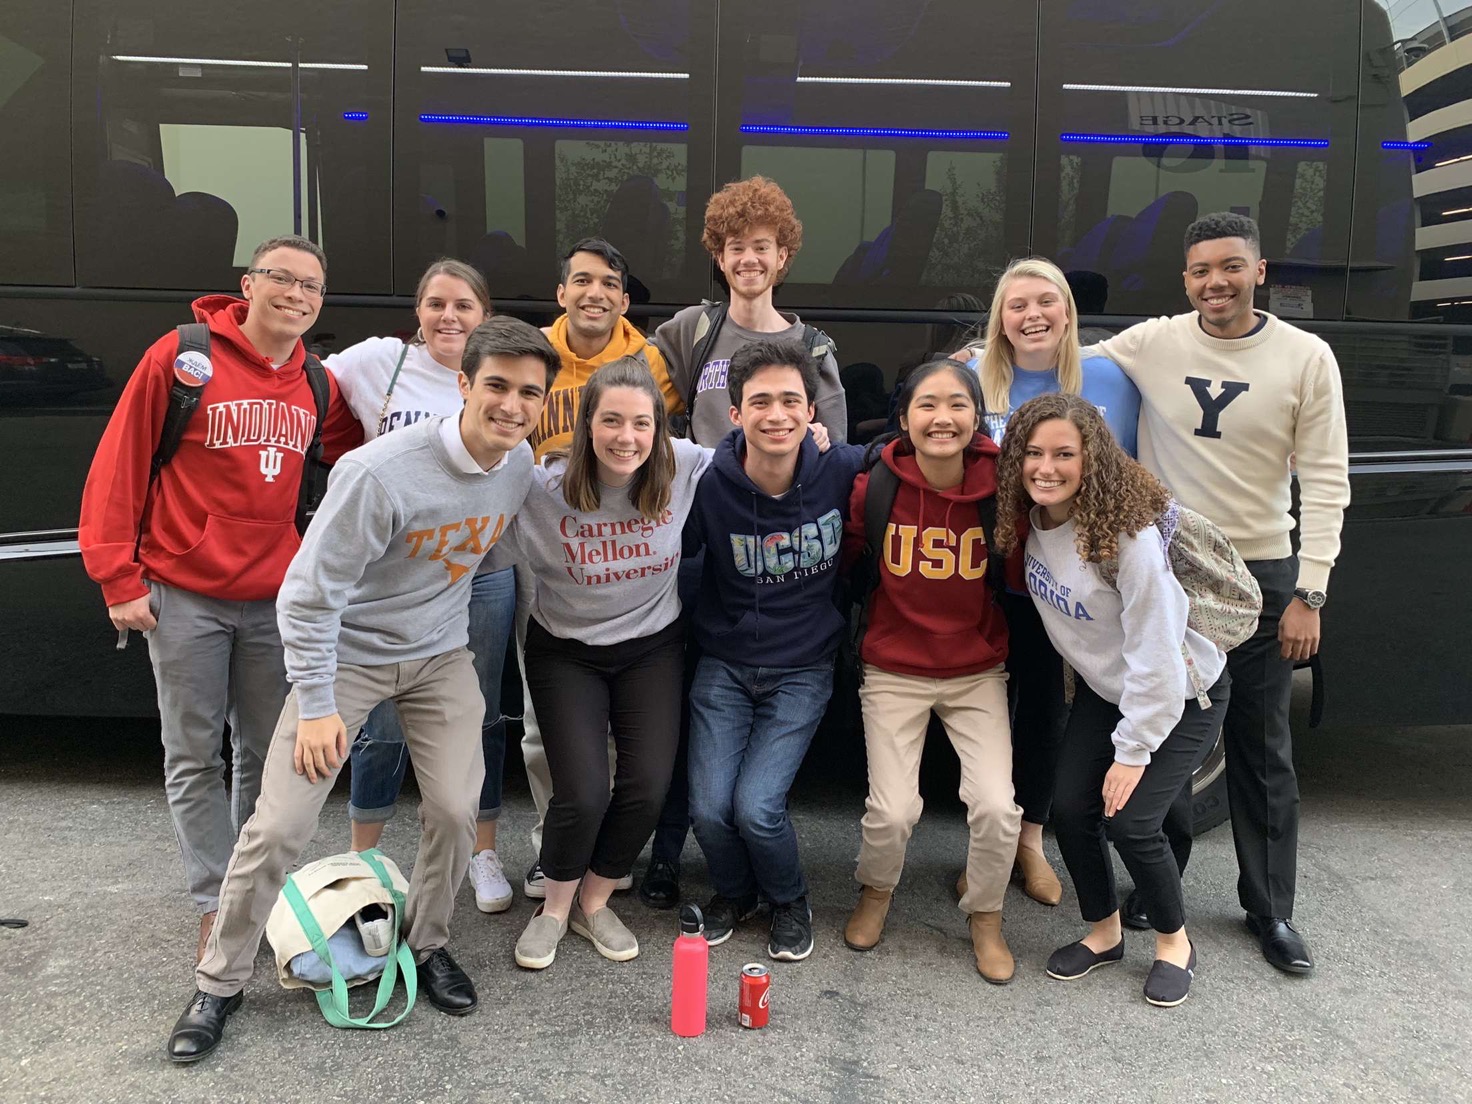 Student participants of the 2020 Jeopardy! College Championship